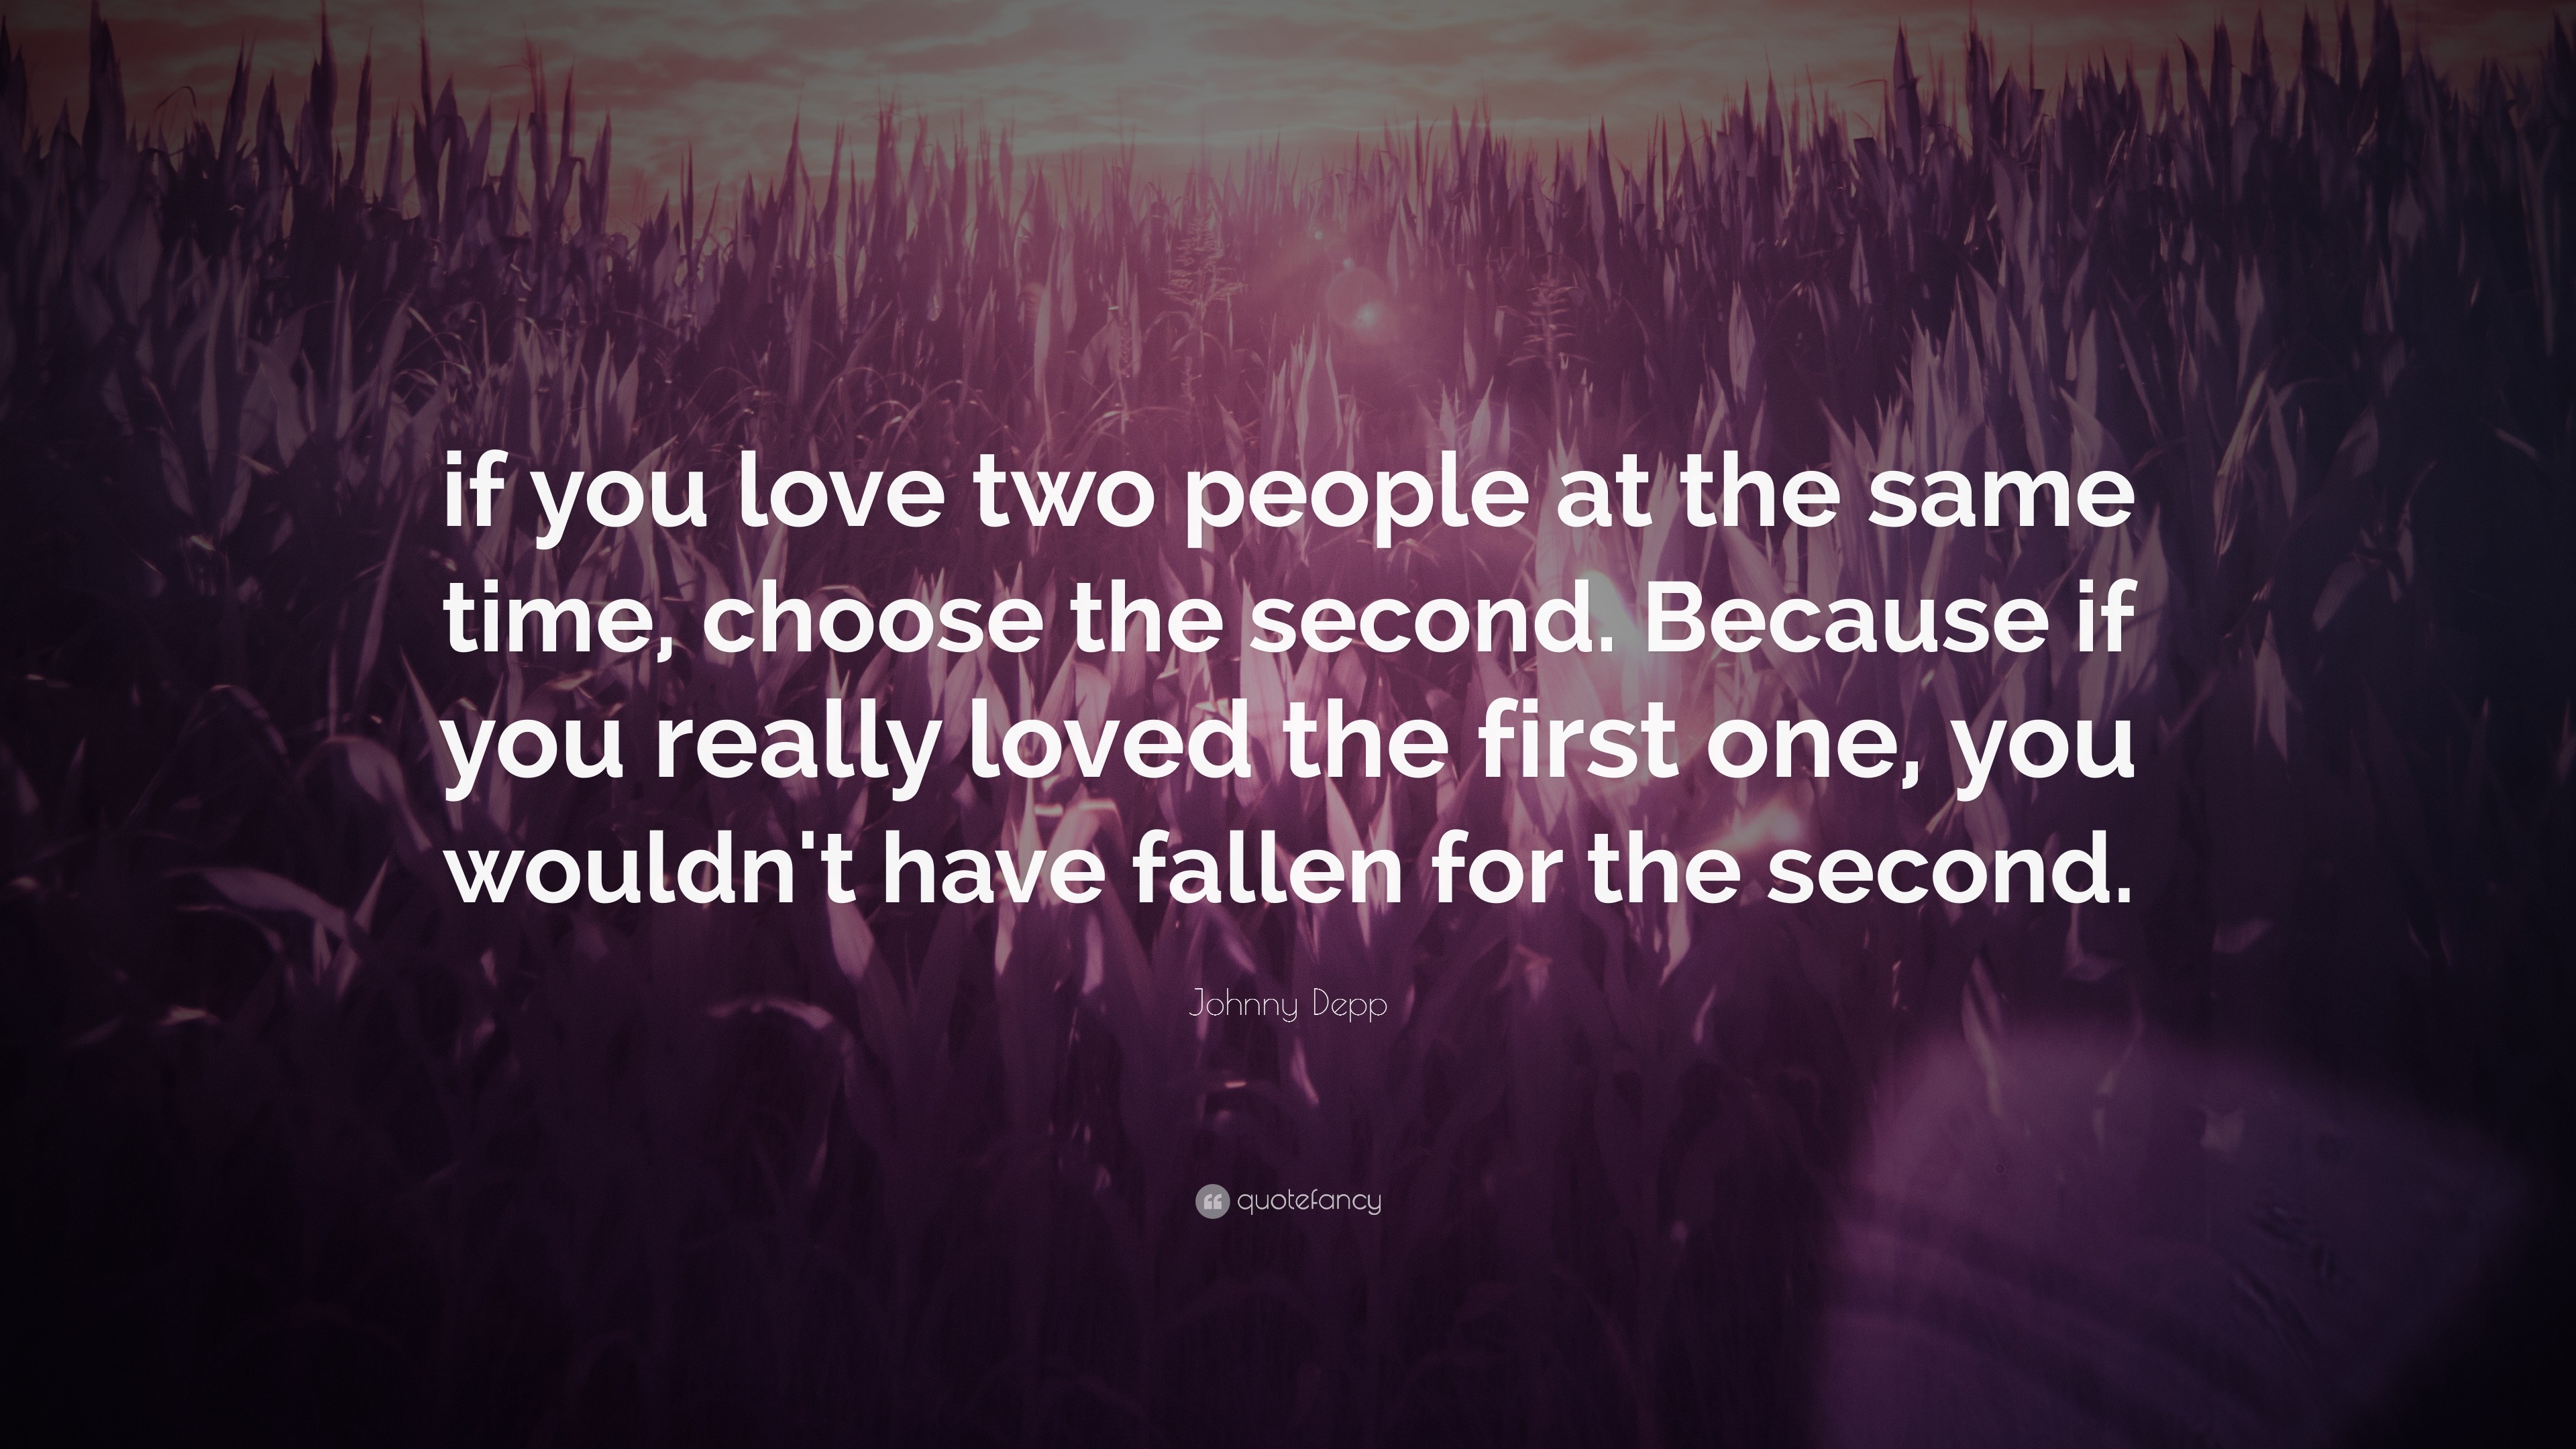 Johnny Depp Quote “If you love two people at the same time choose